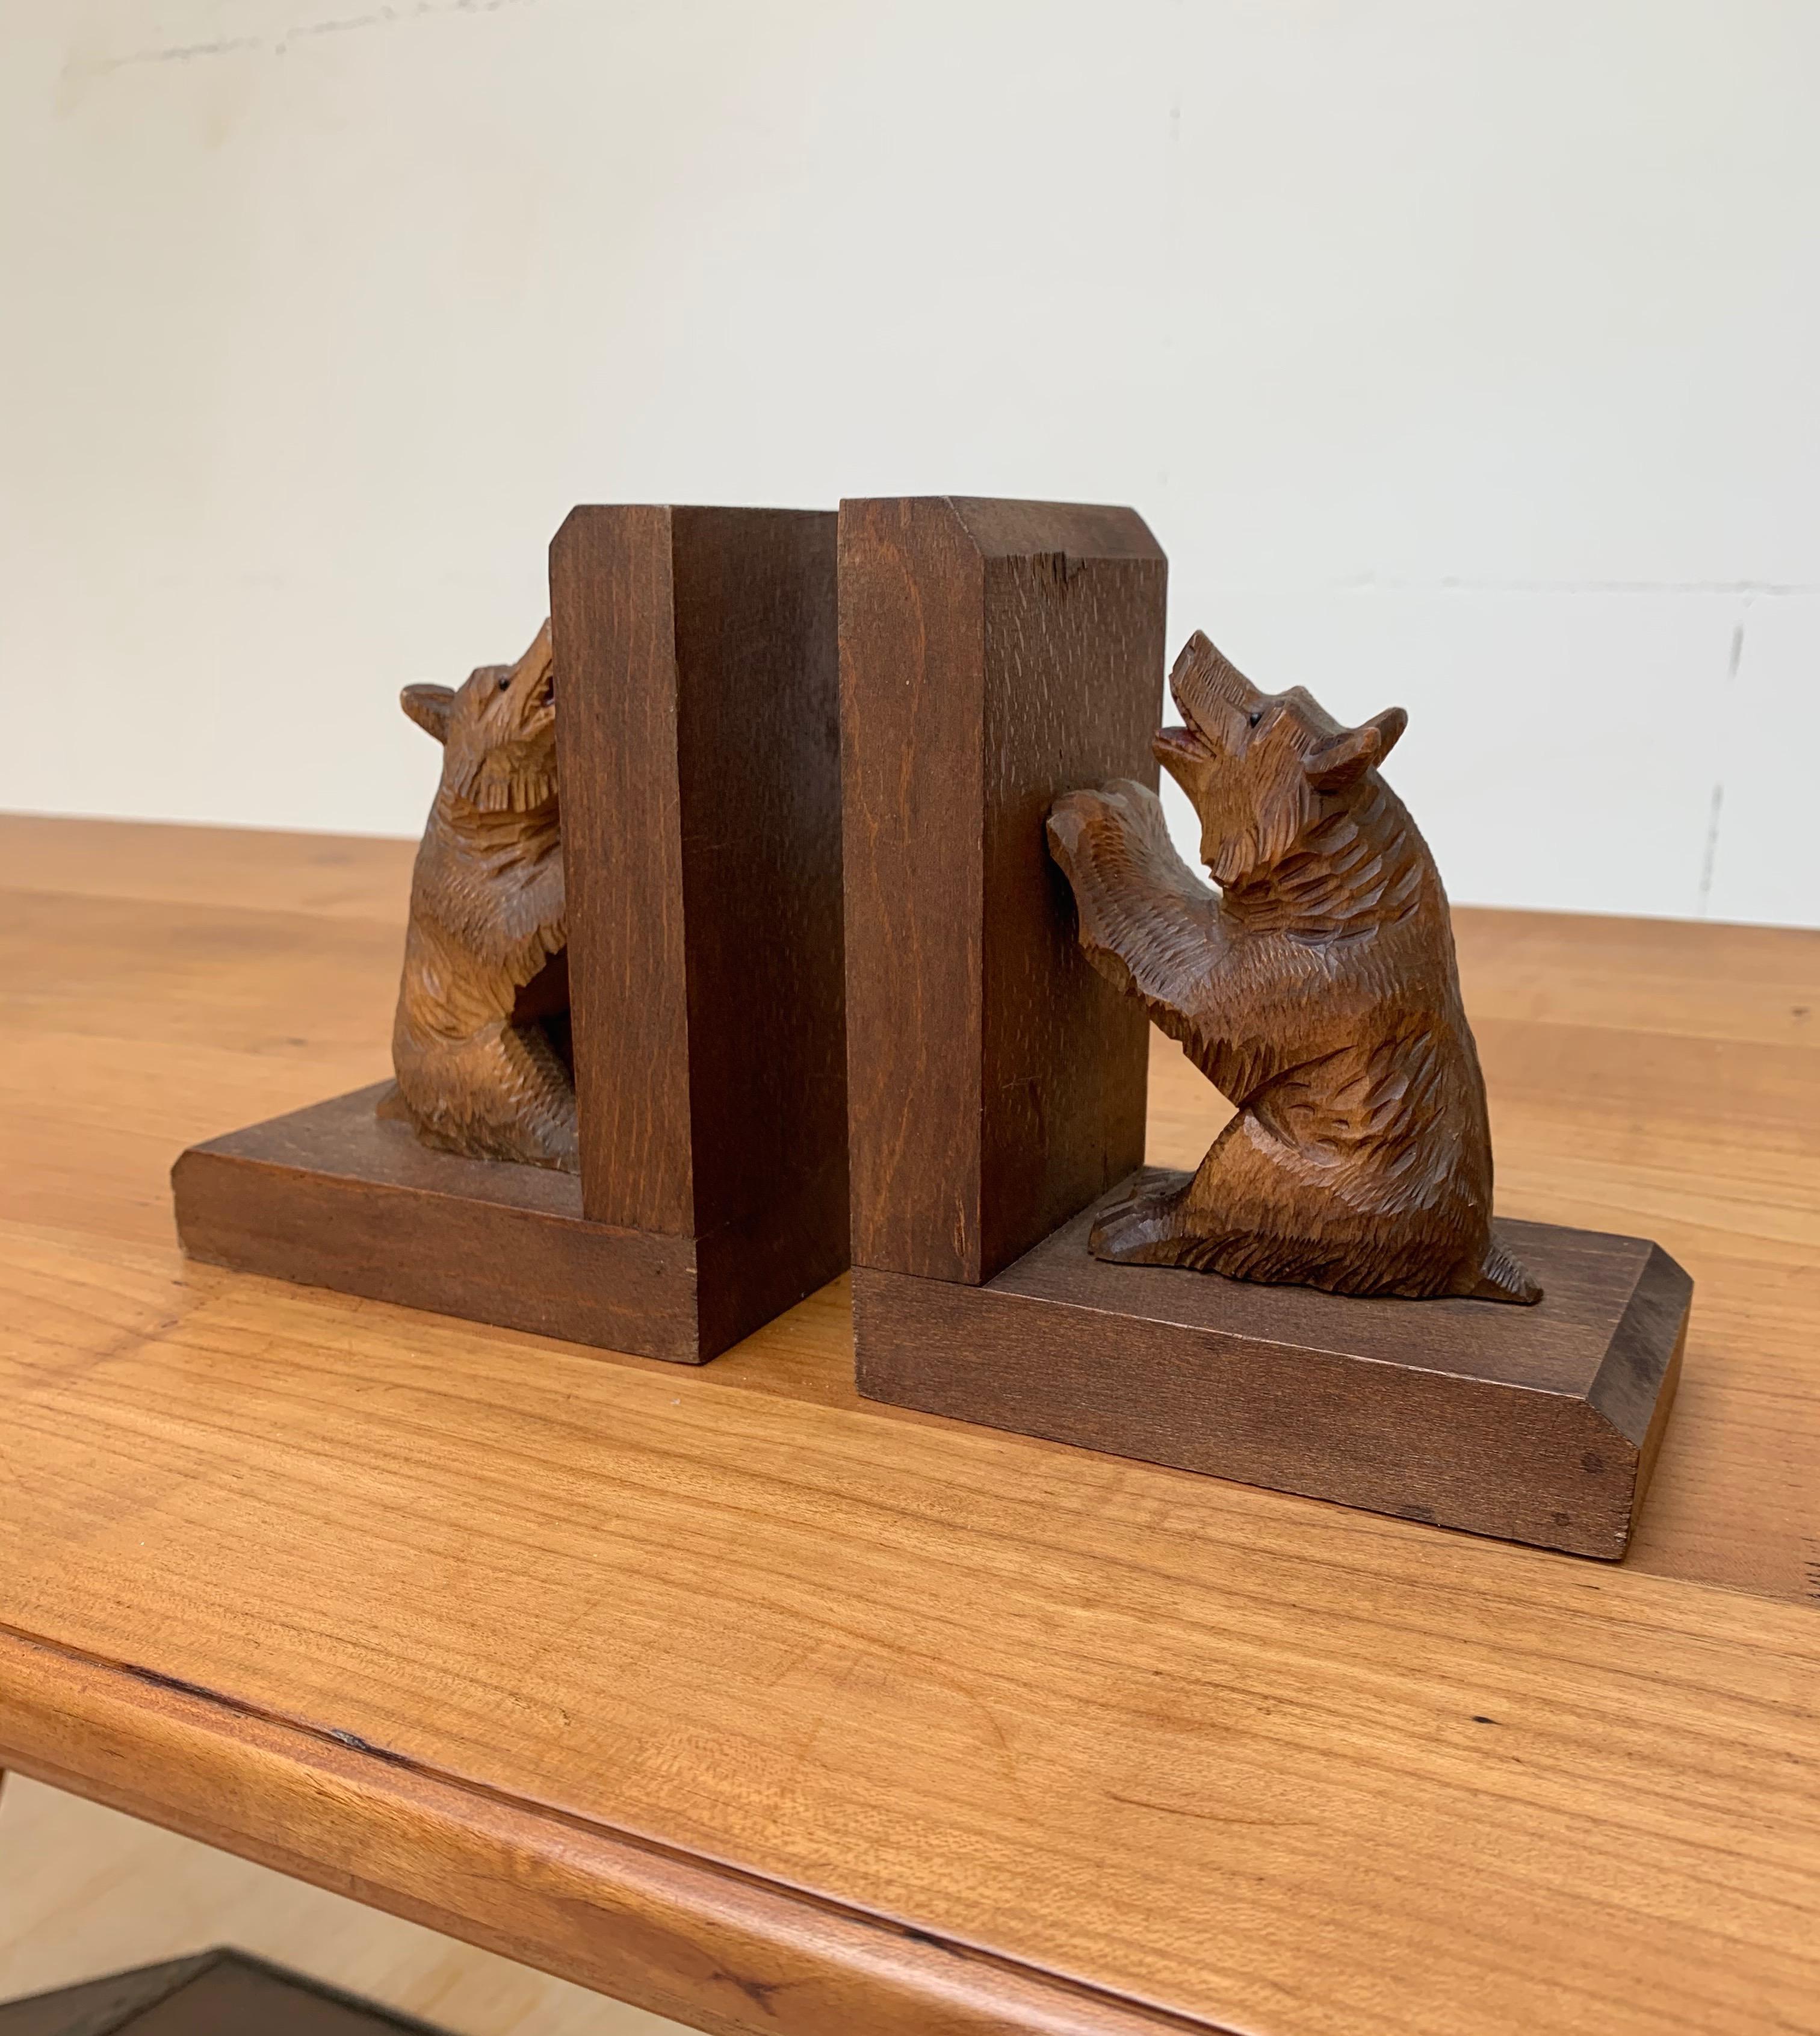 Early 20th Century Art Deco Era Bookends with Hand Carved Bear Sculptures For Sale 5